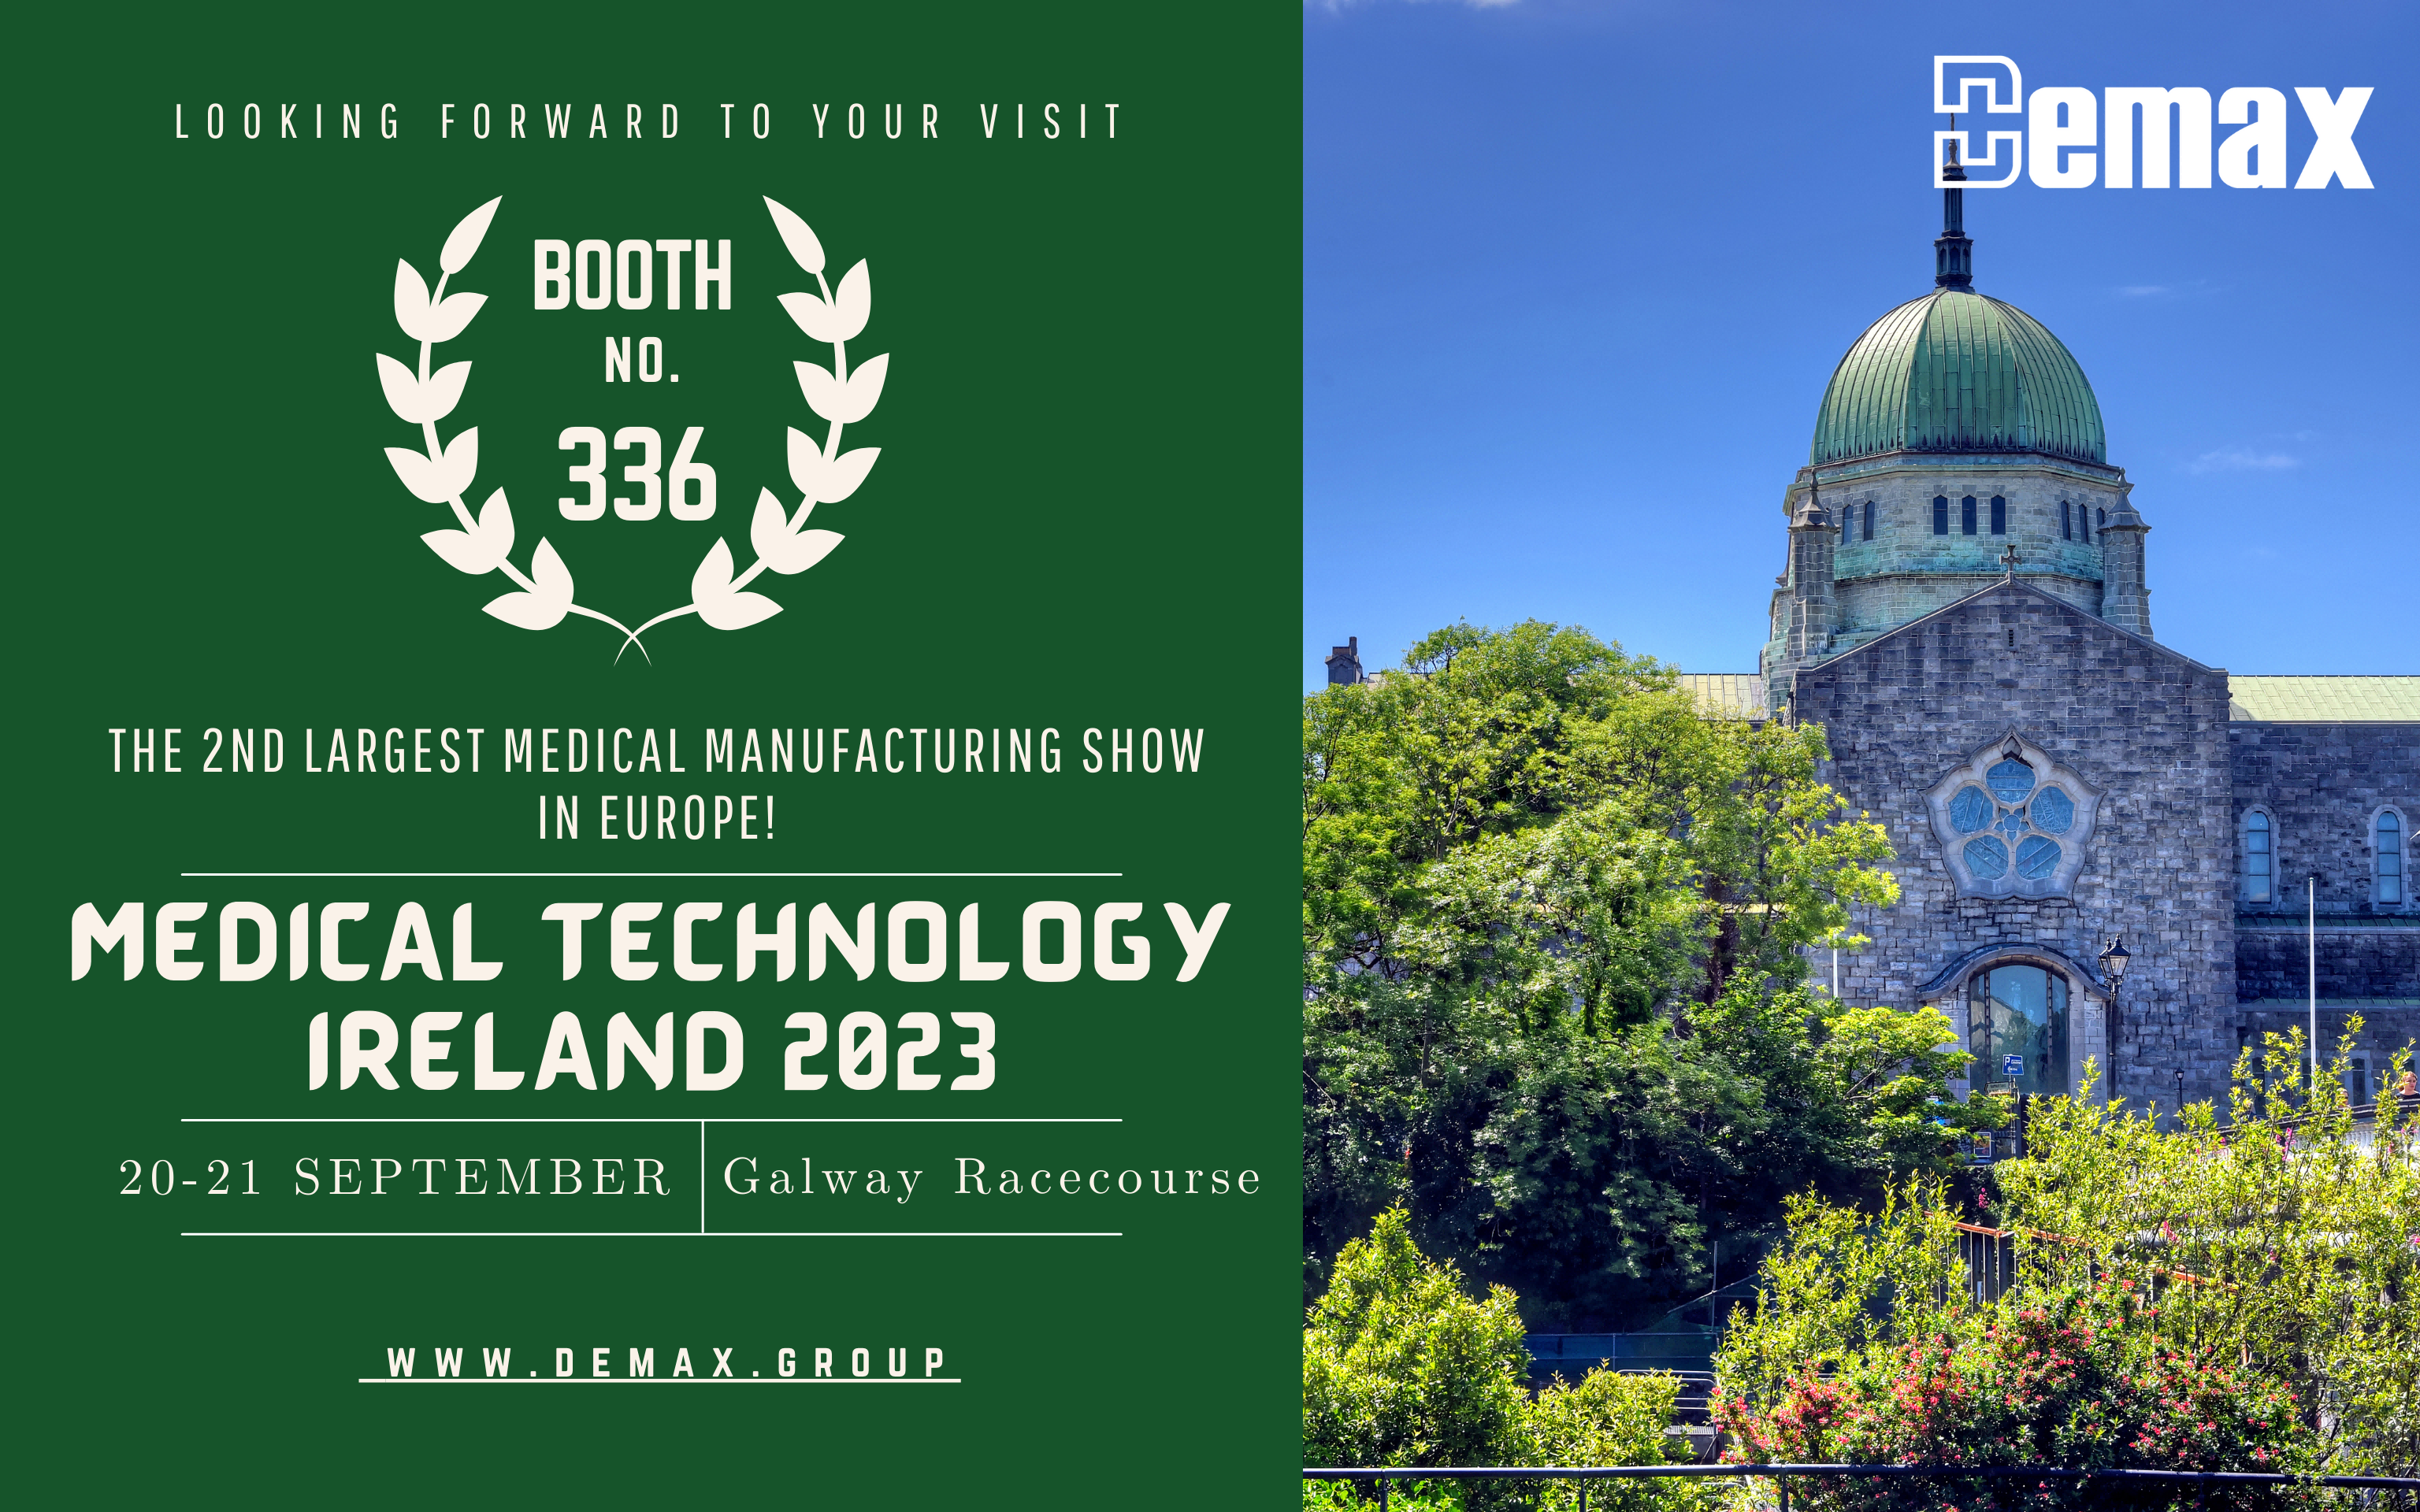 [Debute] On September 20-21, Demax will meet you at booth 336 of Medical Technology Ireland